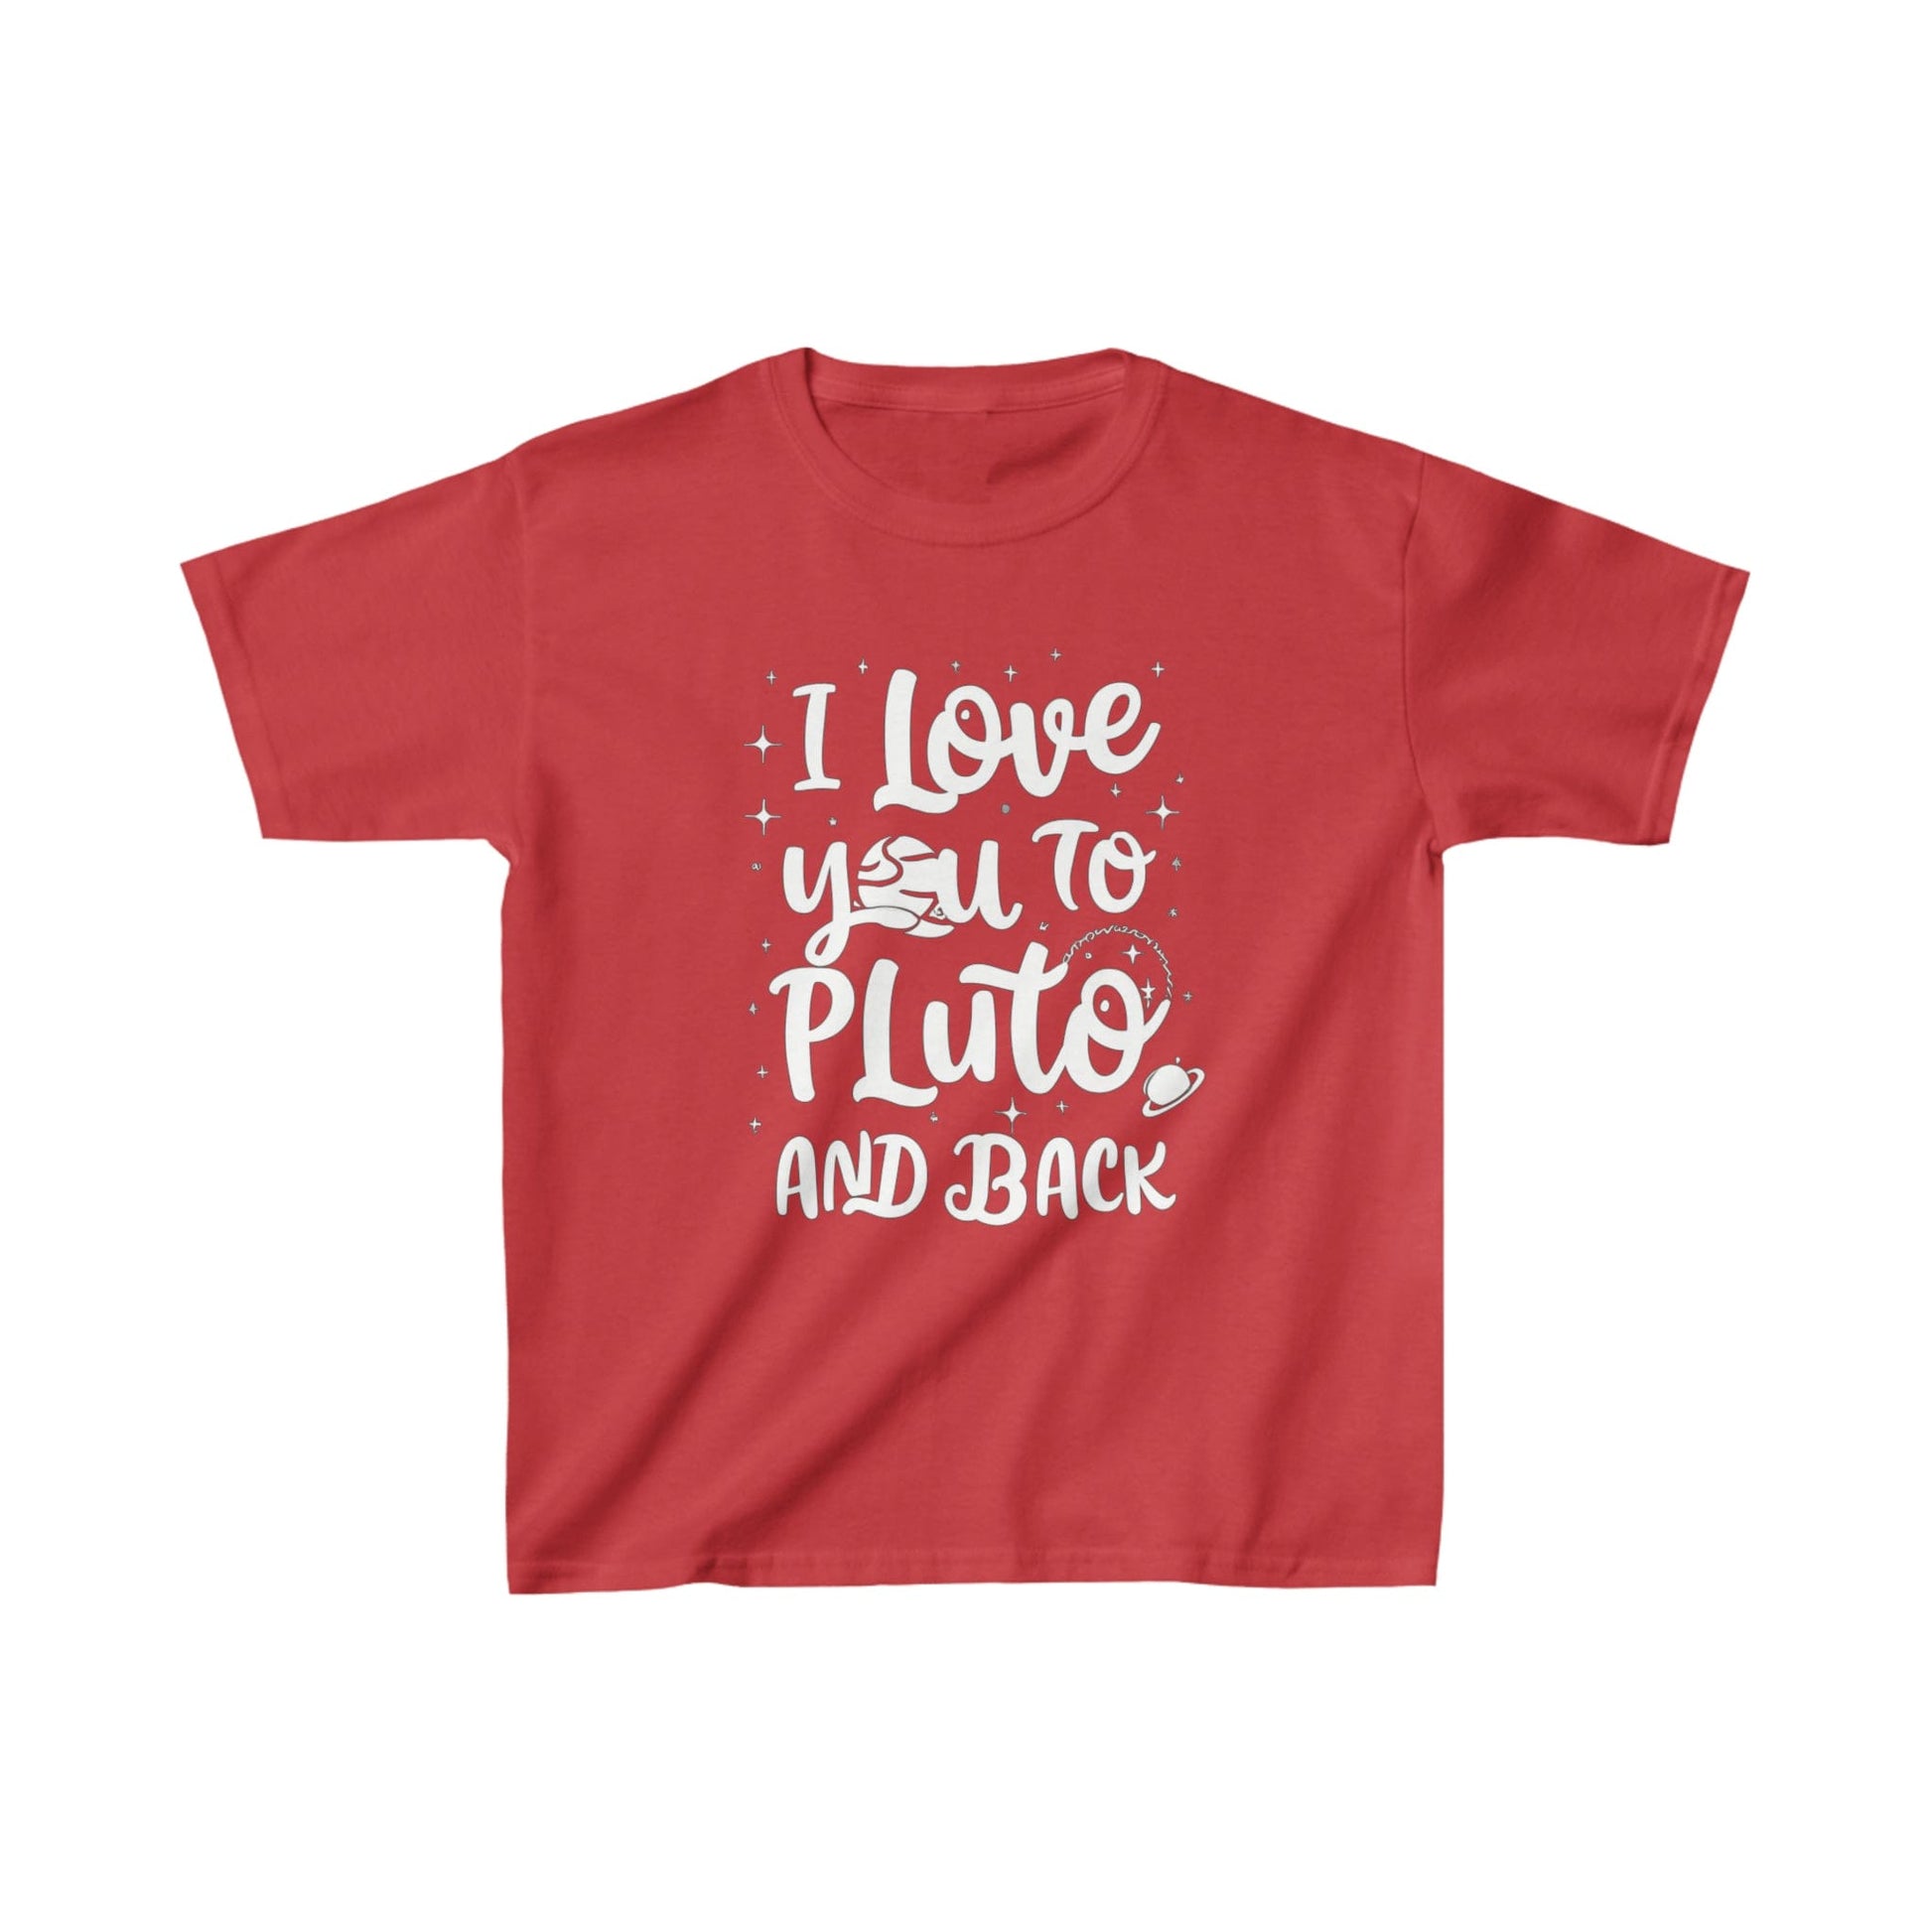 Kids clothes XS / Red Youth Pluto And Back T-Shirt